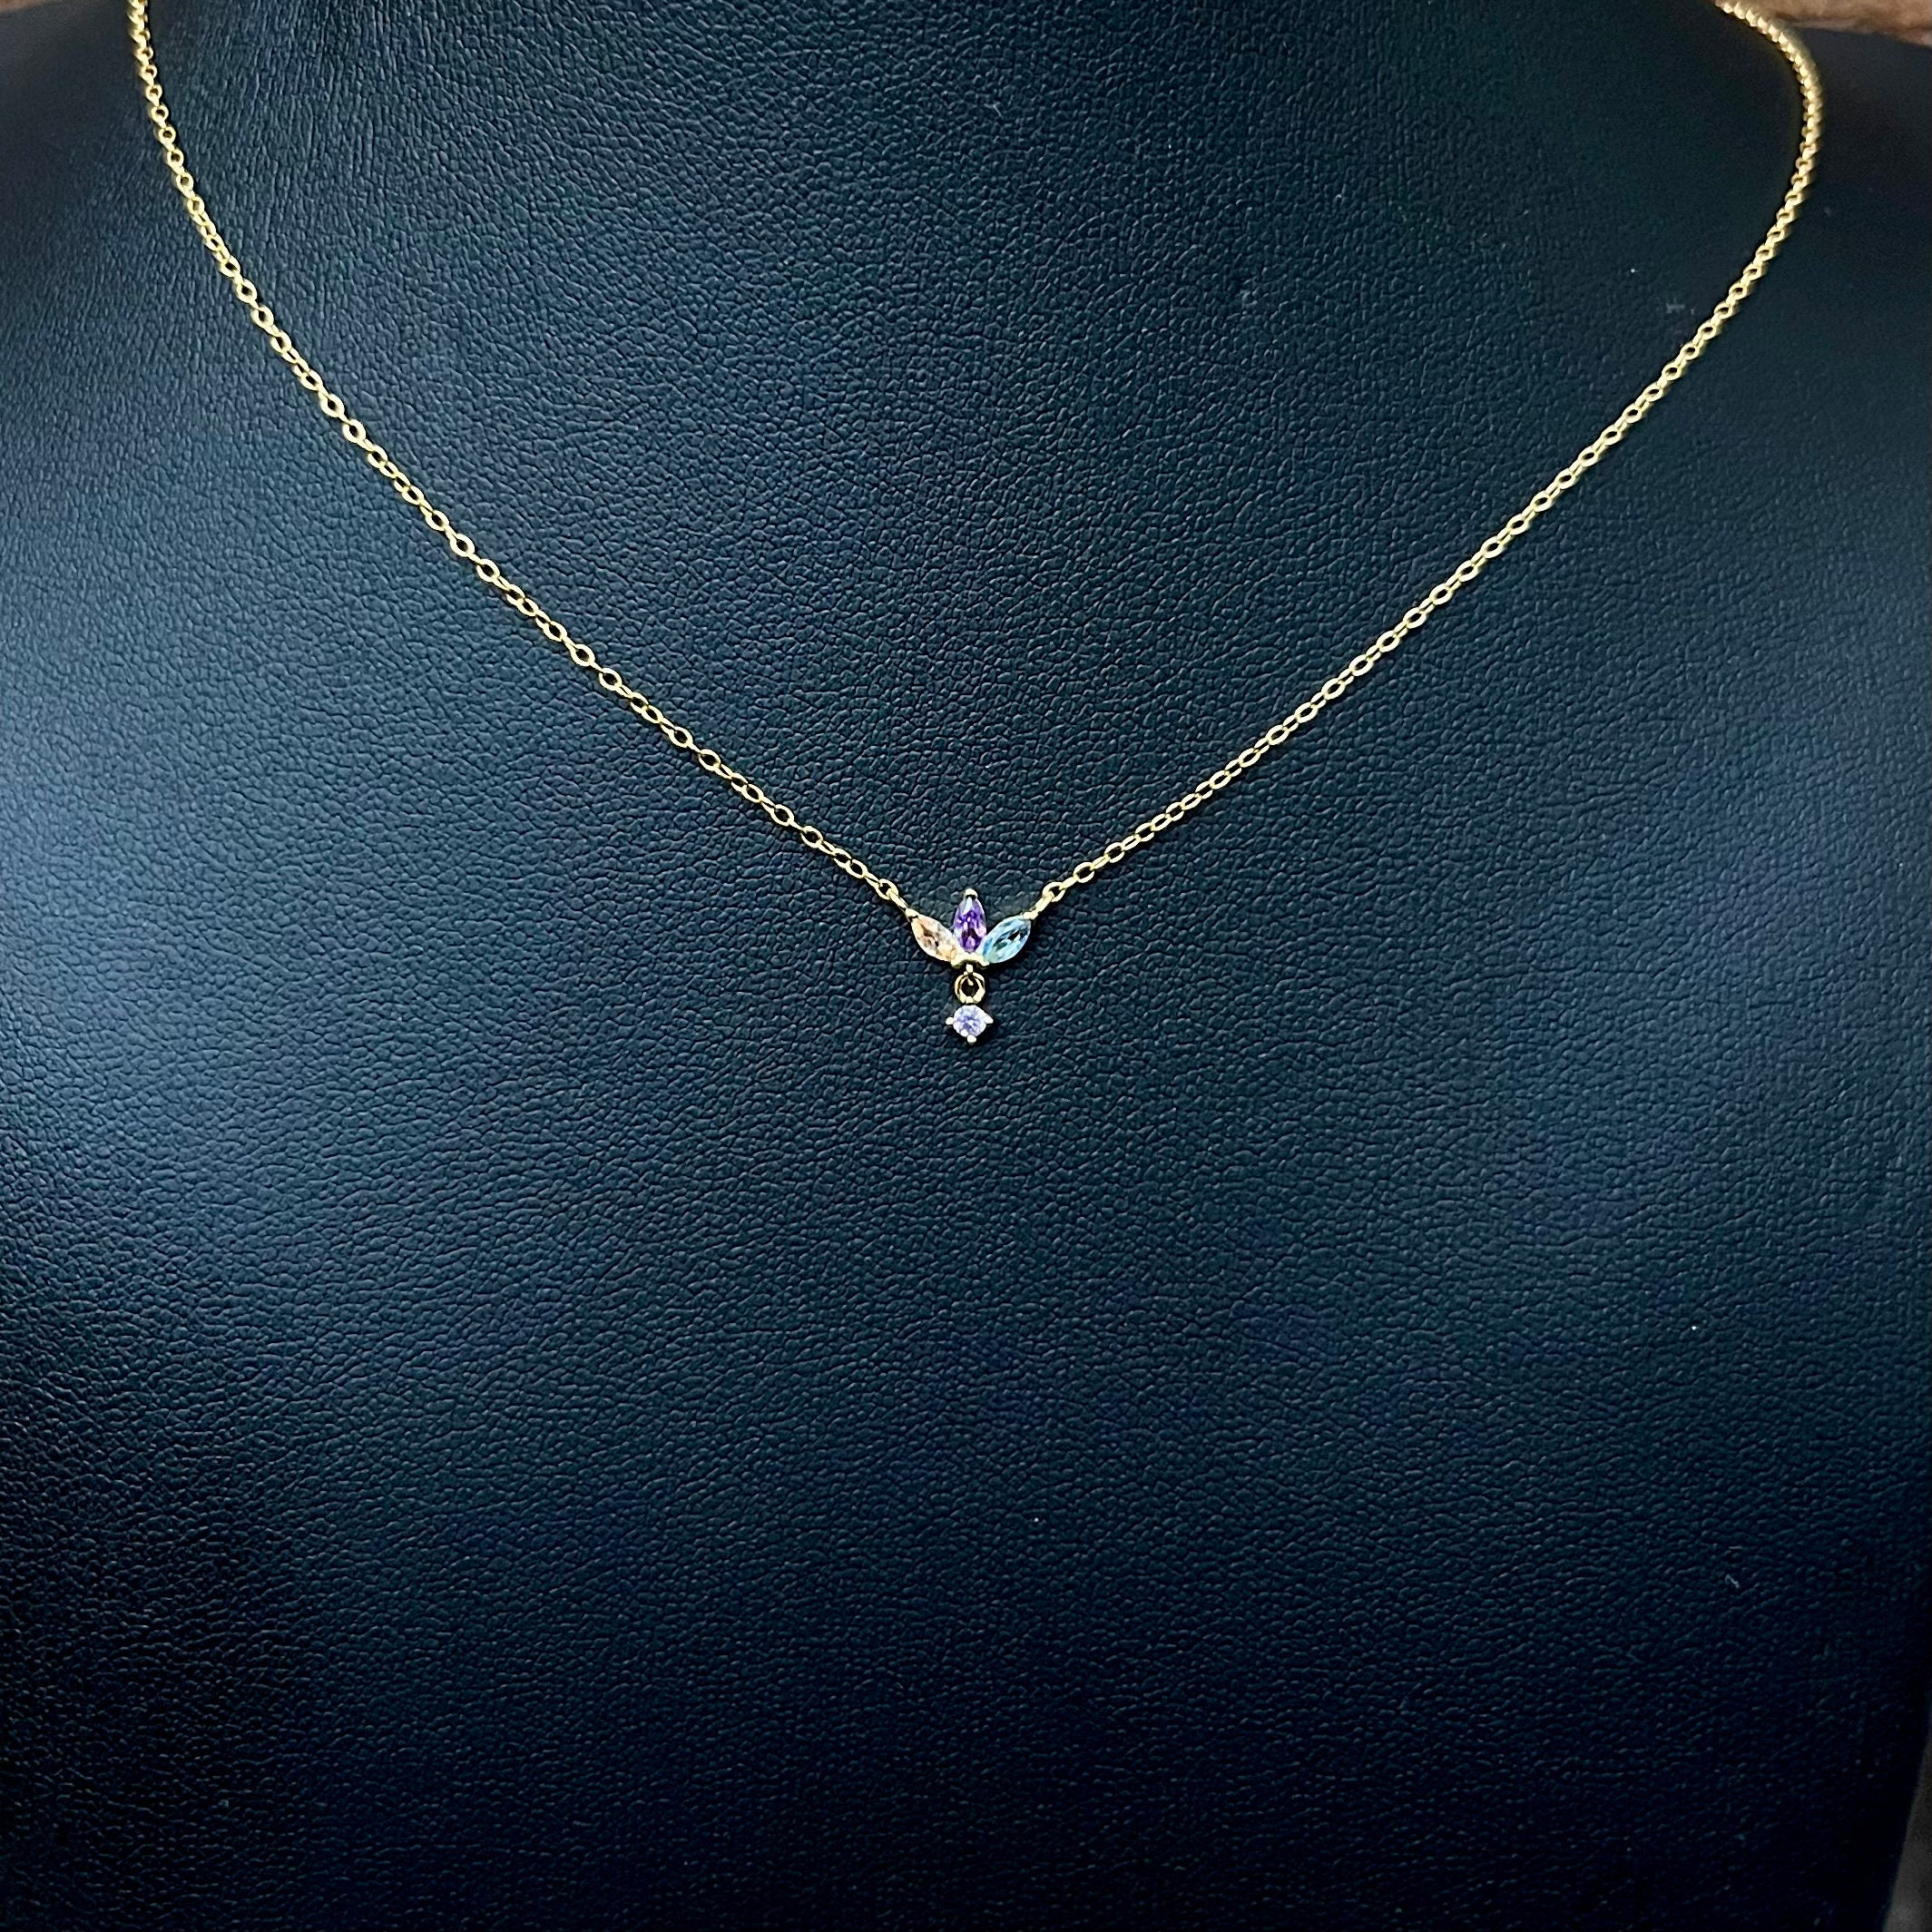 Petals and Pavé Small Pendant Necklace